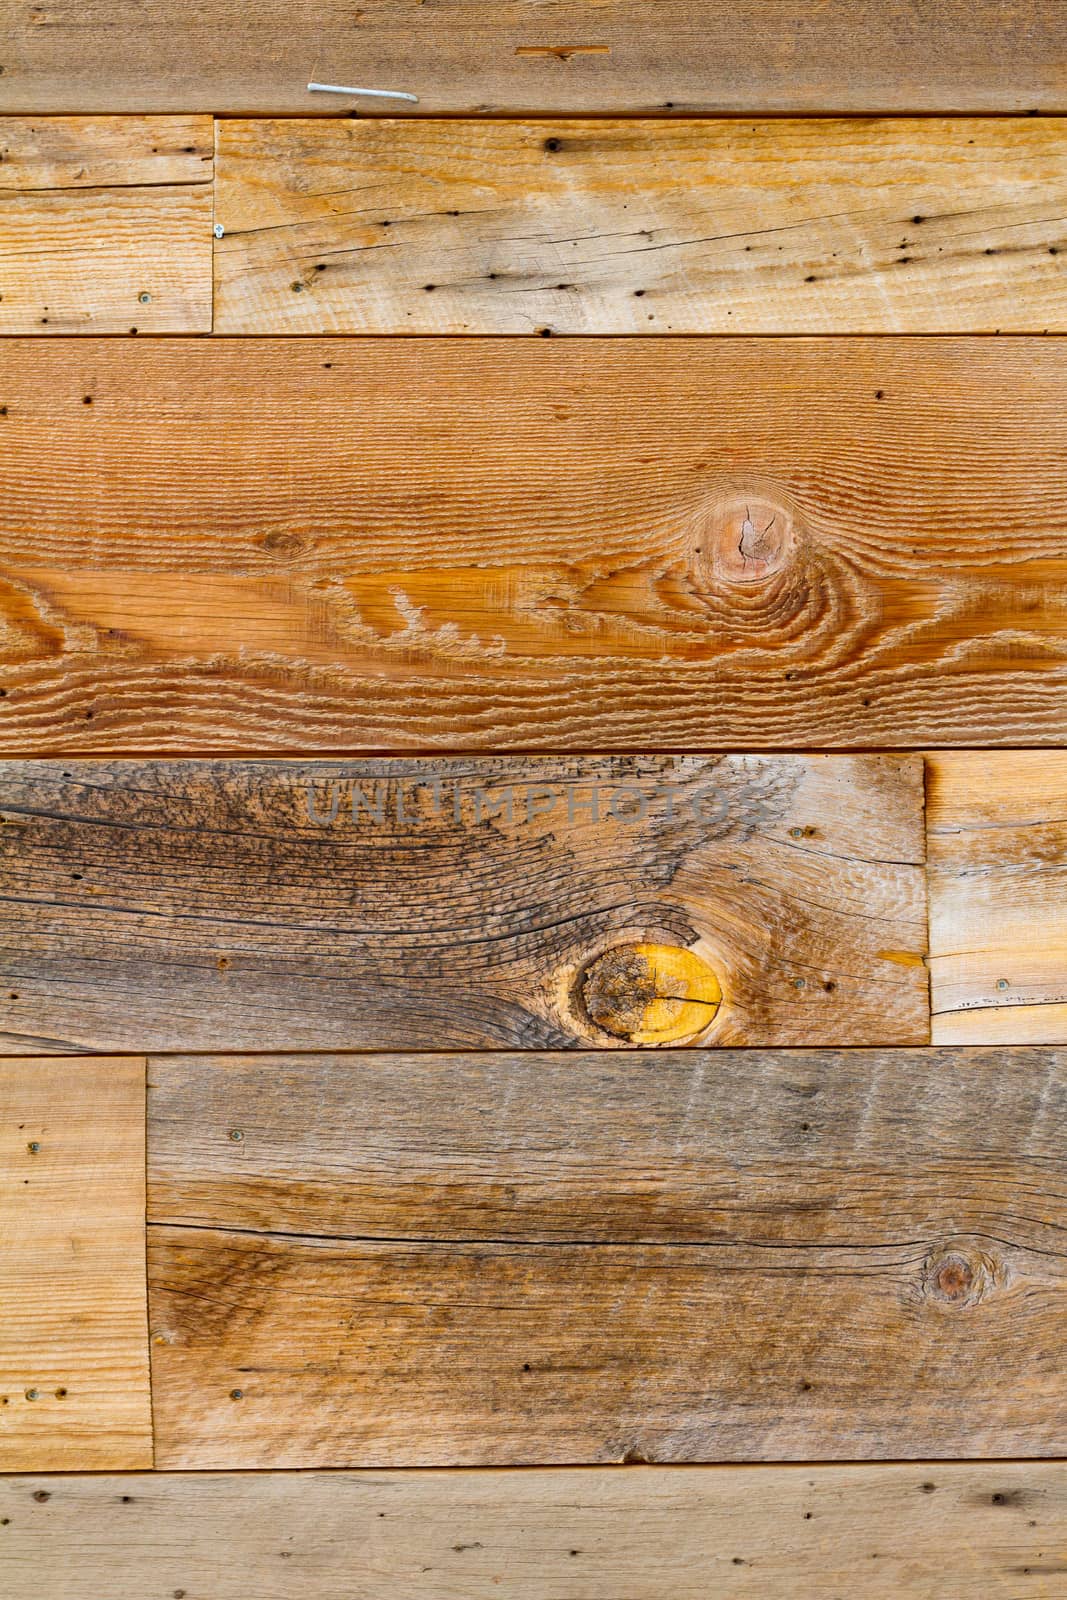 A cool looking wood texture abstract perfect for designers to use with copyspace and great tones.